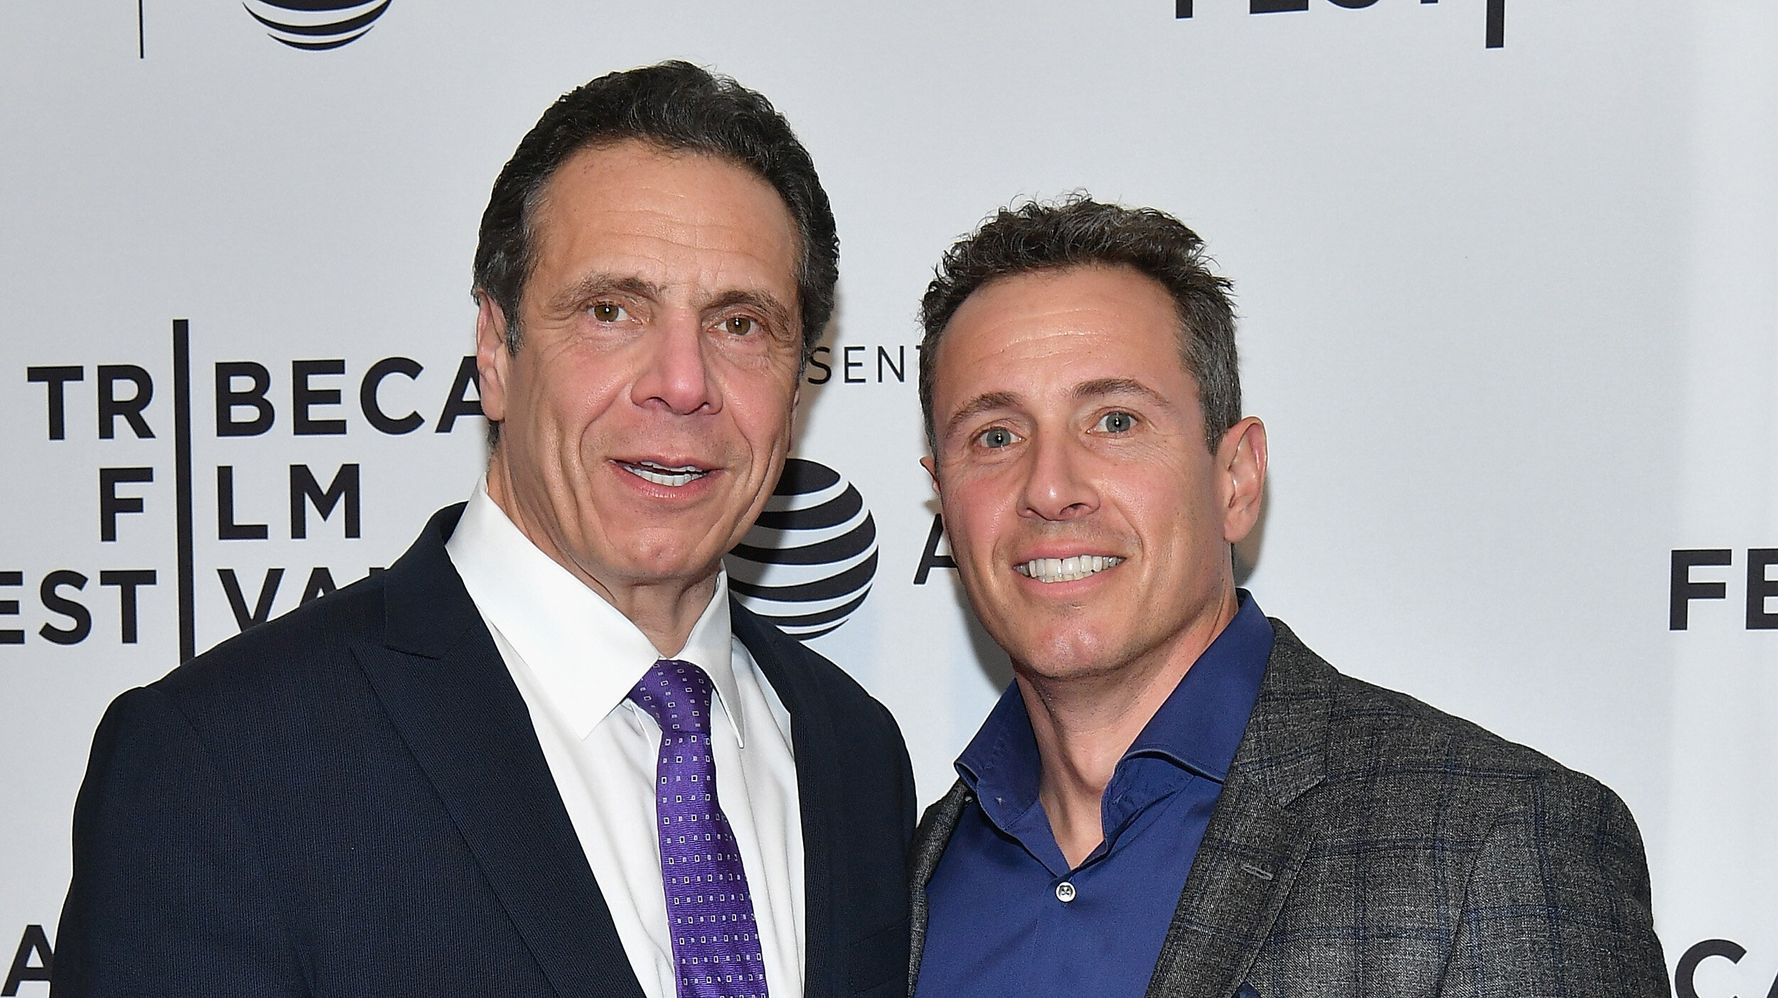 Chris Cuomo Advised Governor Brother On Response To Sexual Harassment Claims: Report